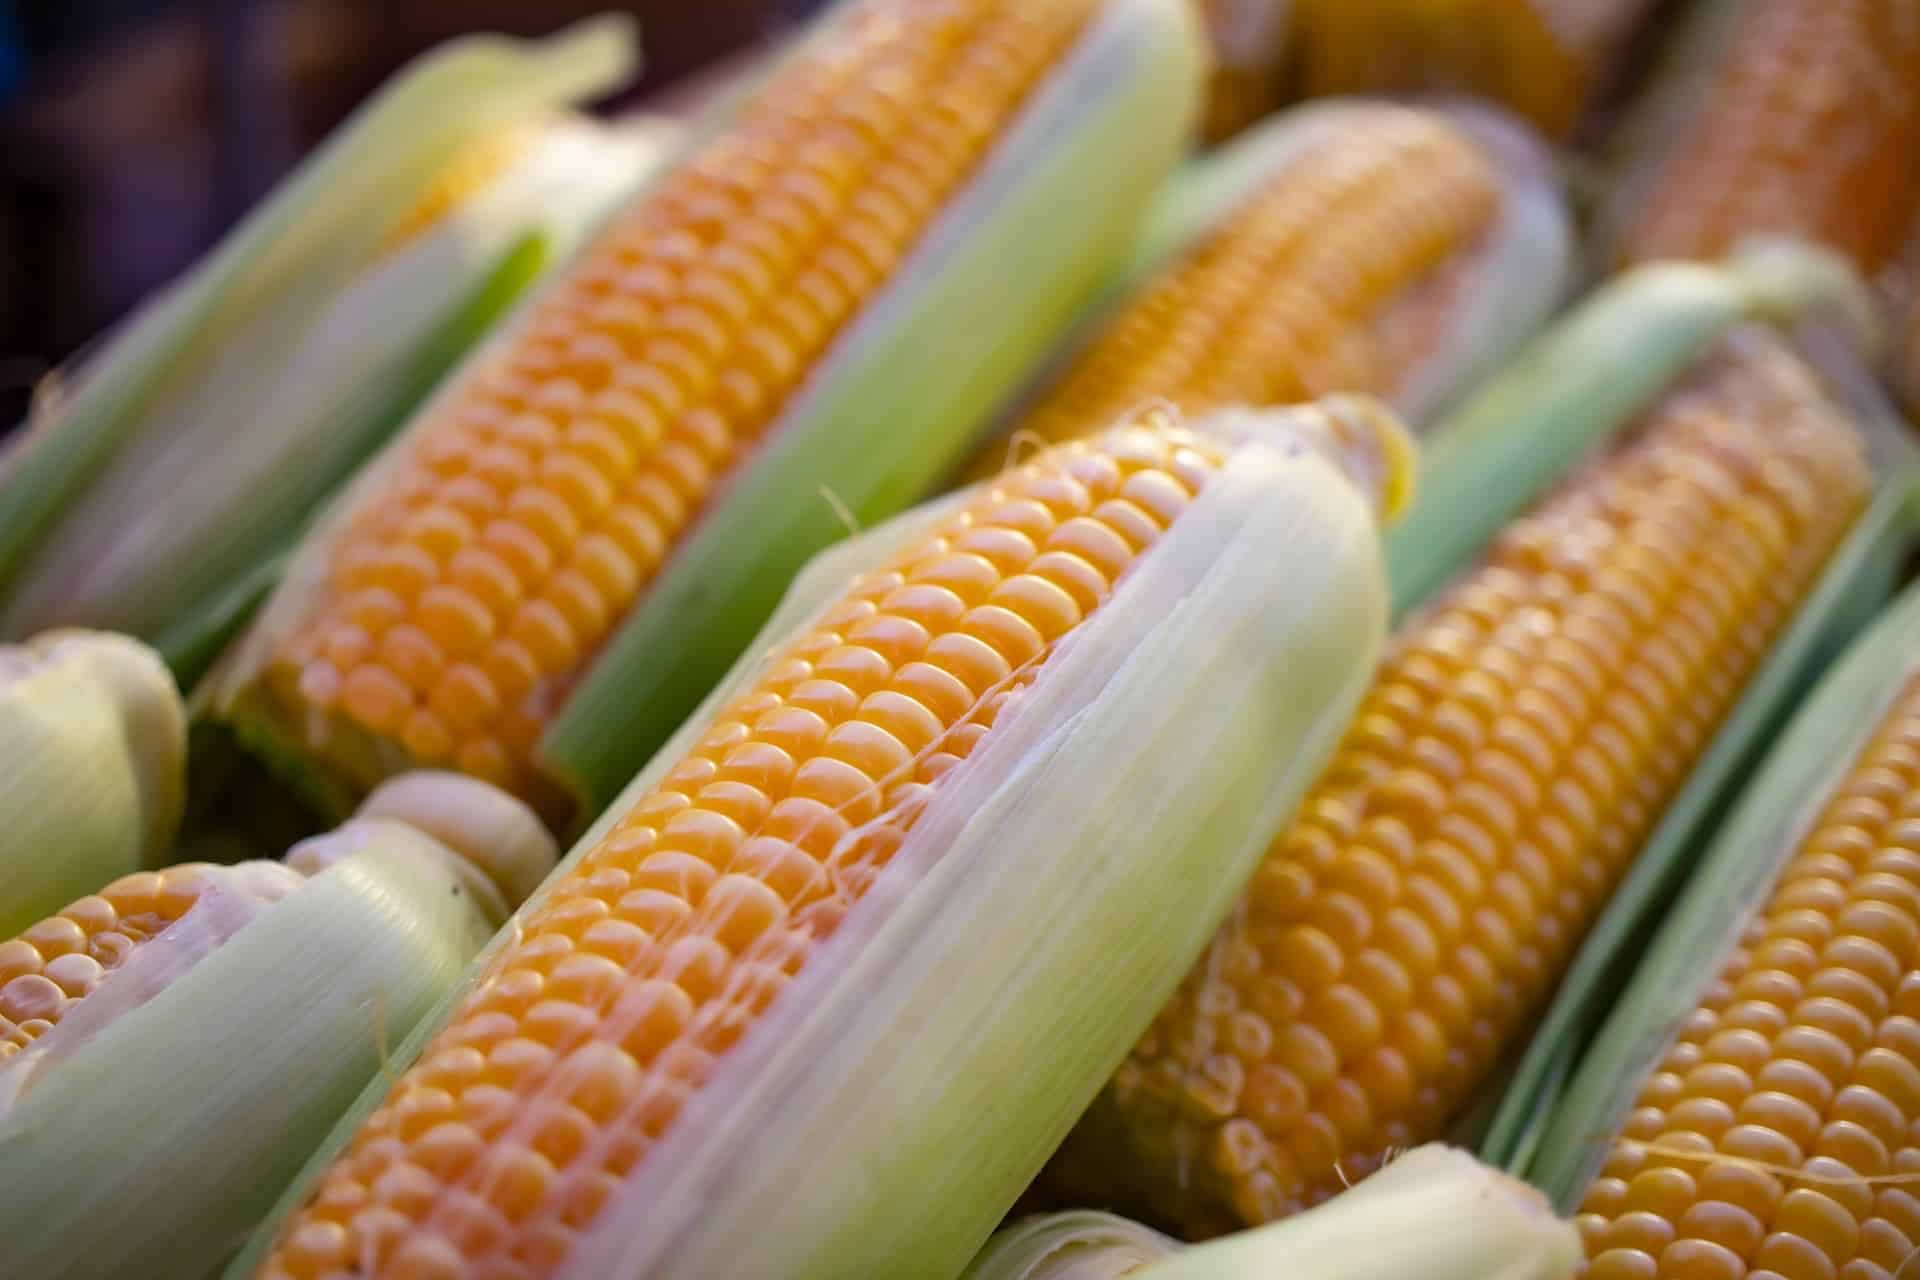 horizontal close up photo of uncooked corn cobs close up. For Clinton County Corn Festival. Image: https://unsplash.com/photos/HE_MjmWh9eQ